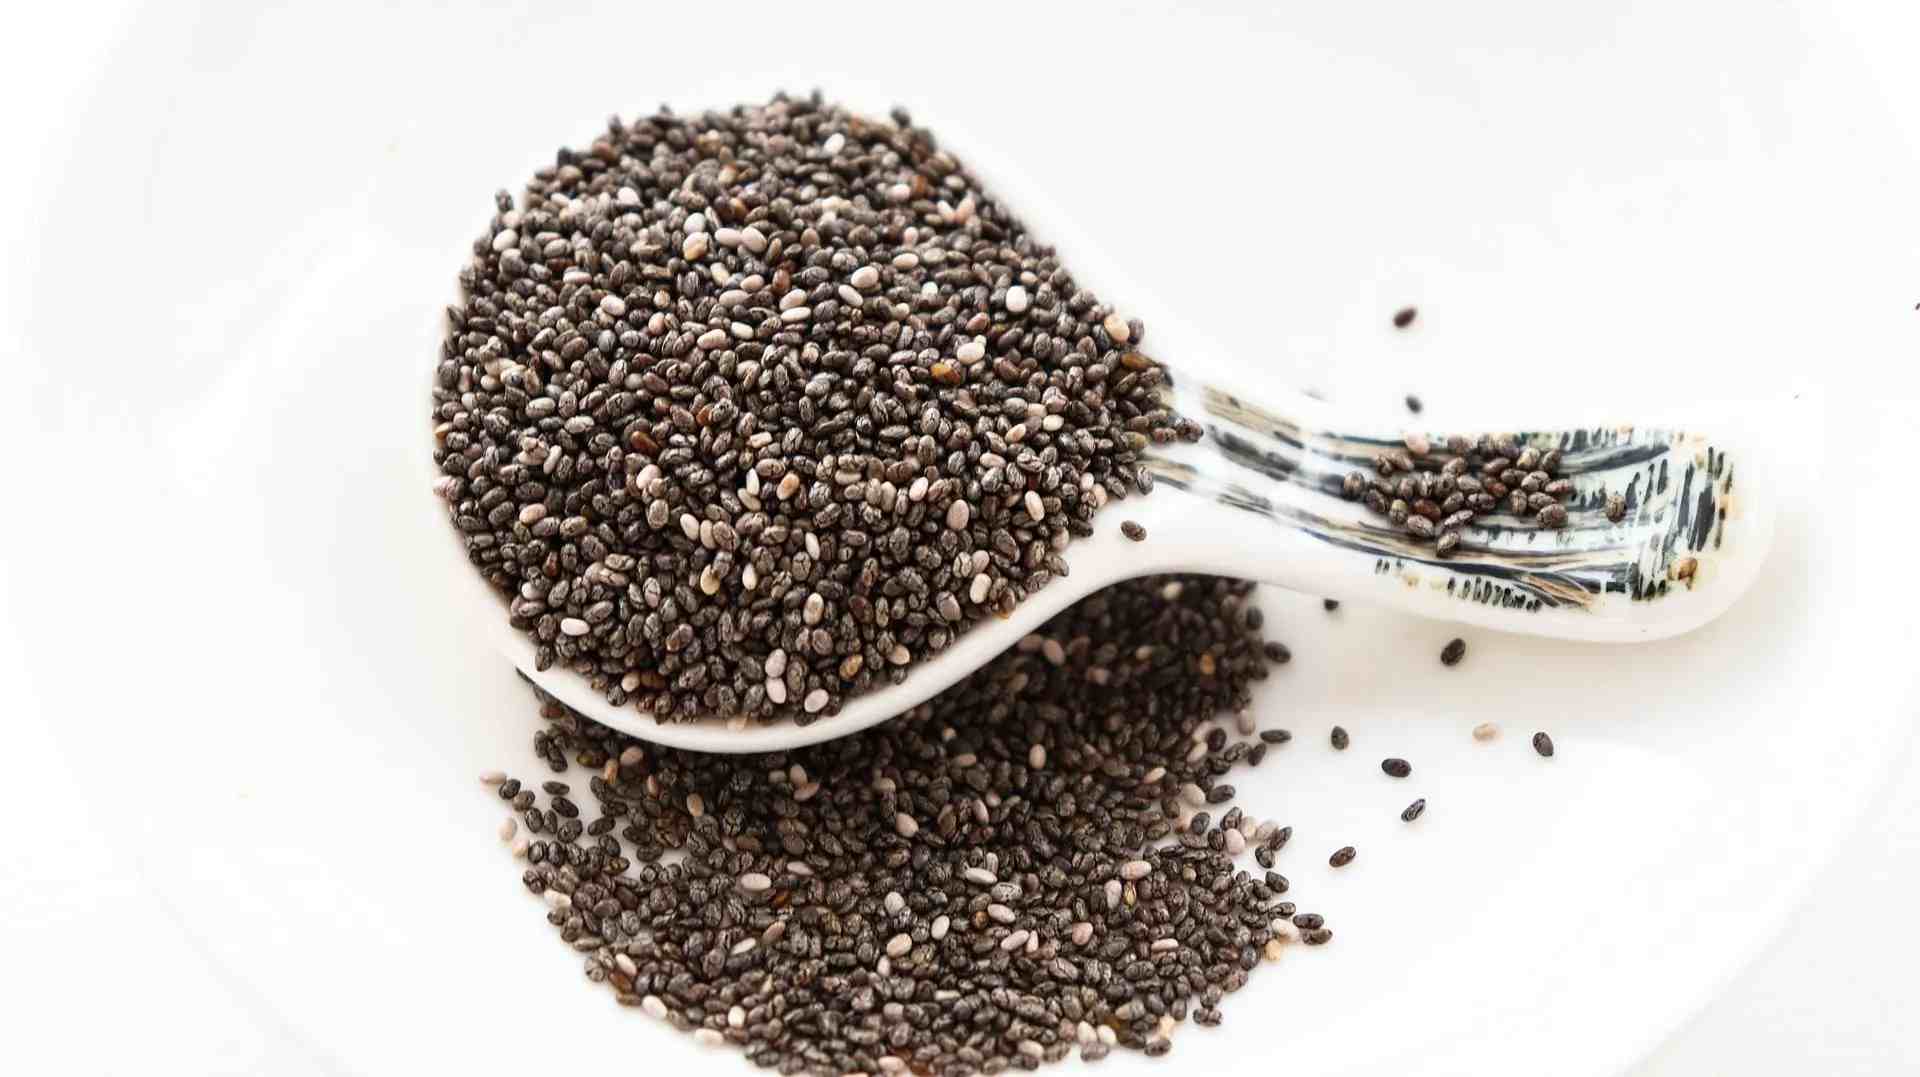 Chia seeds are similar to flax seeds